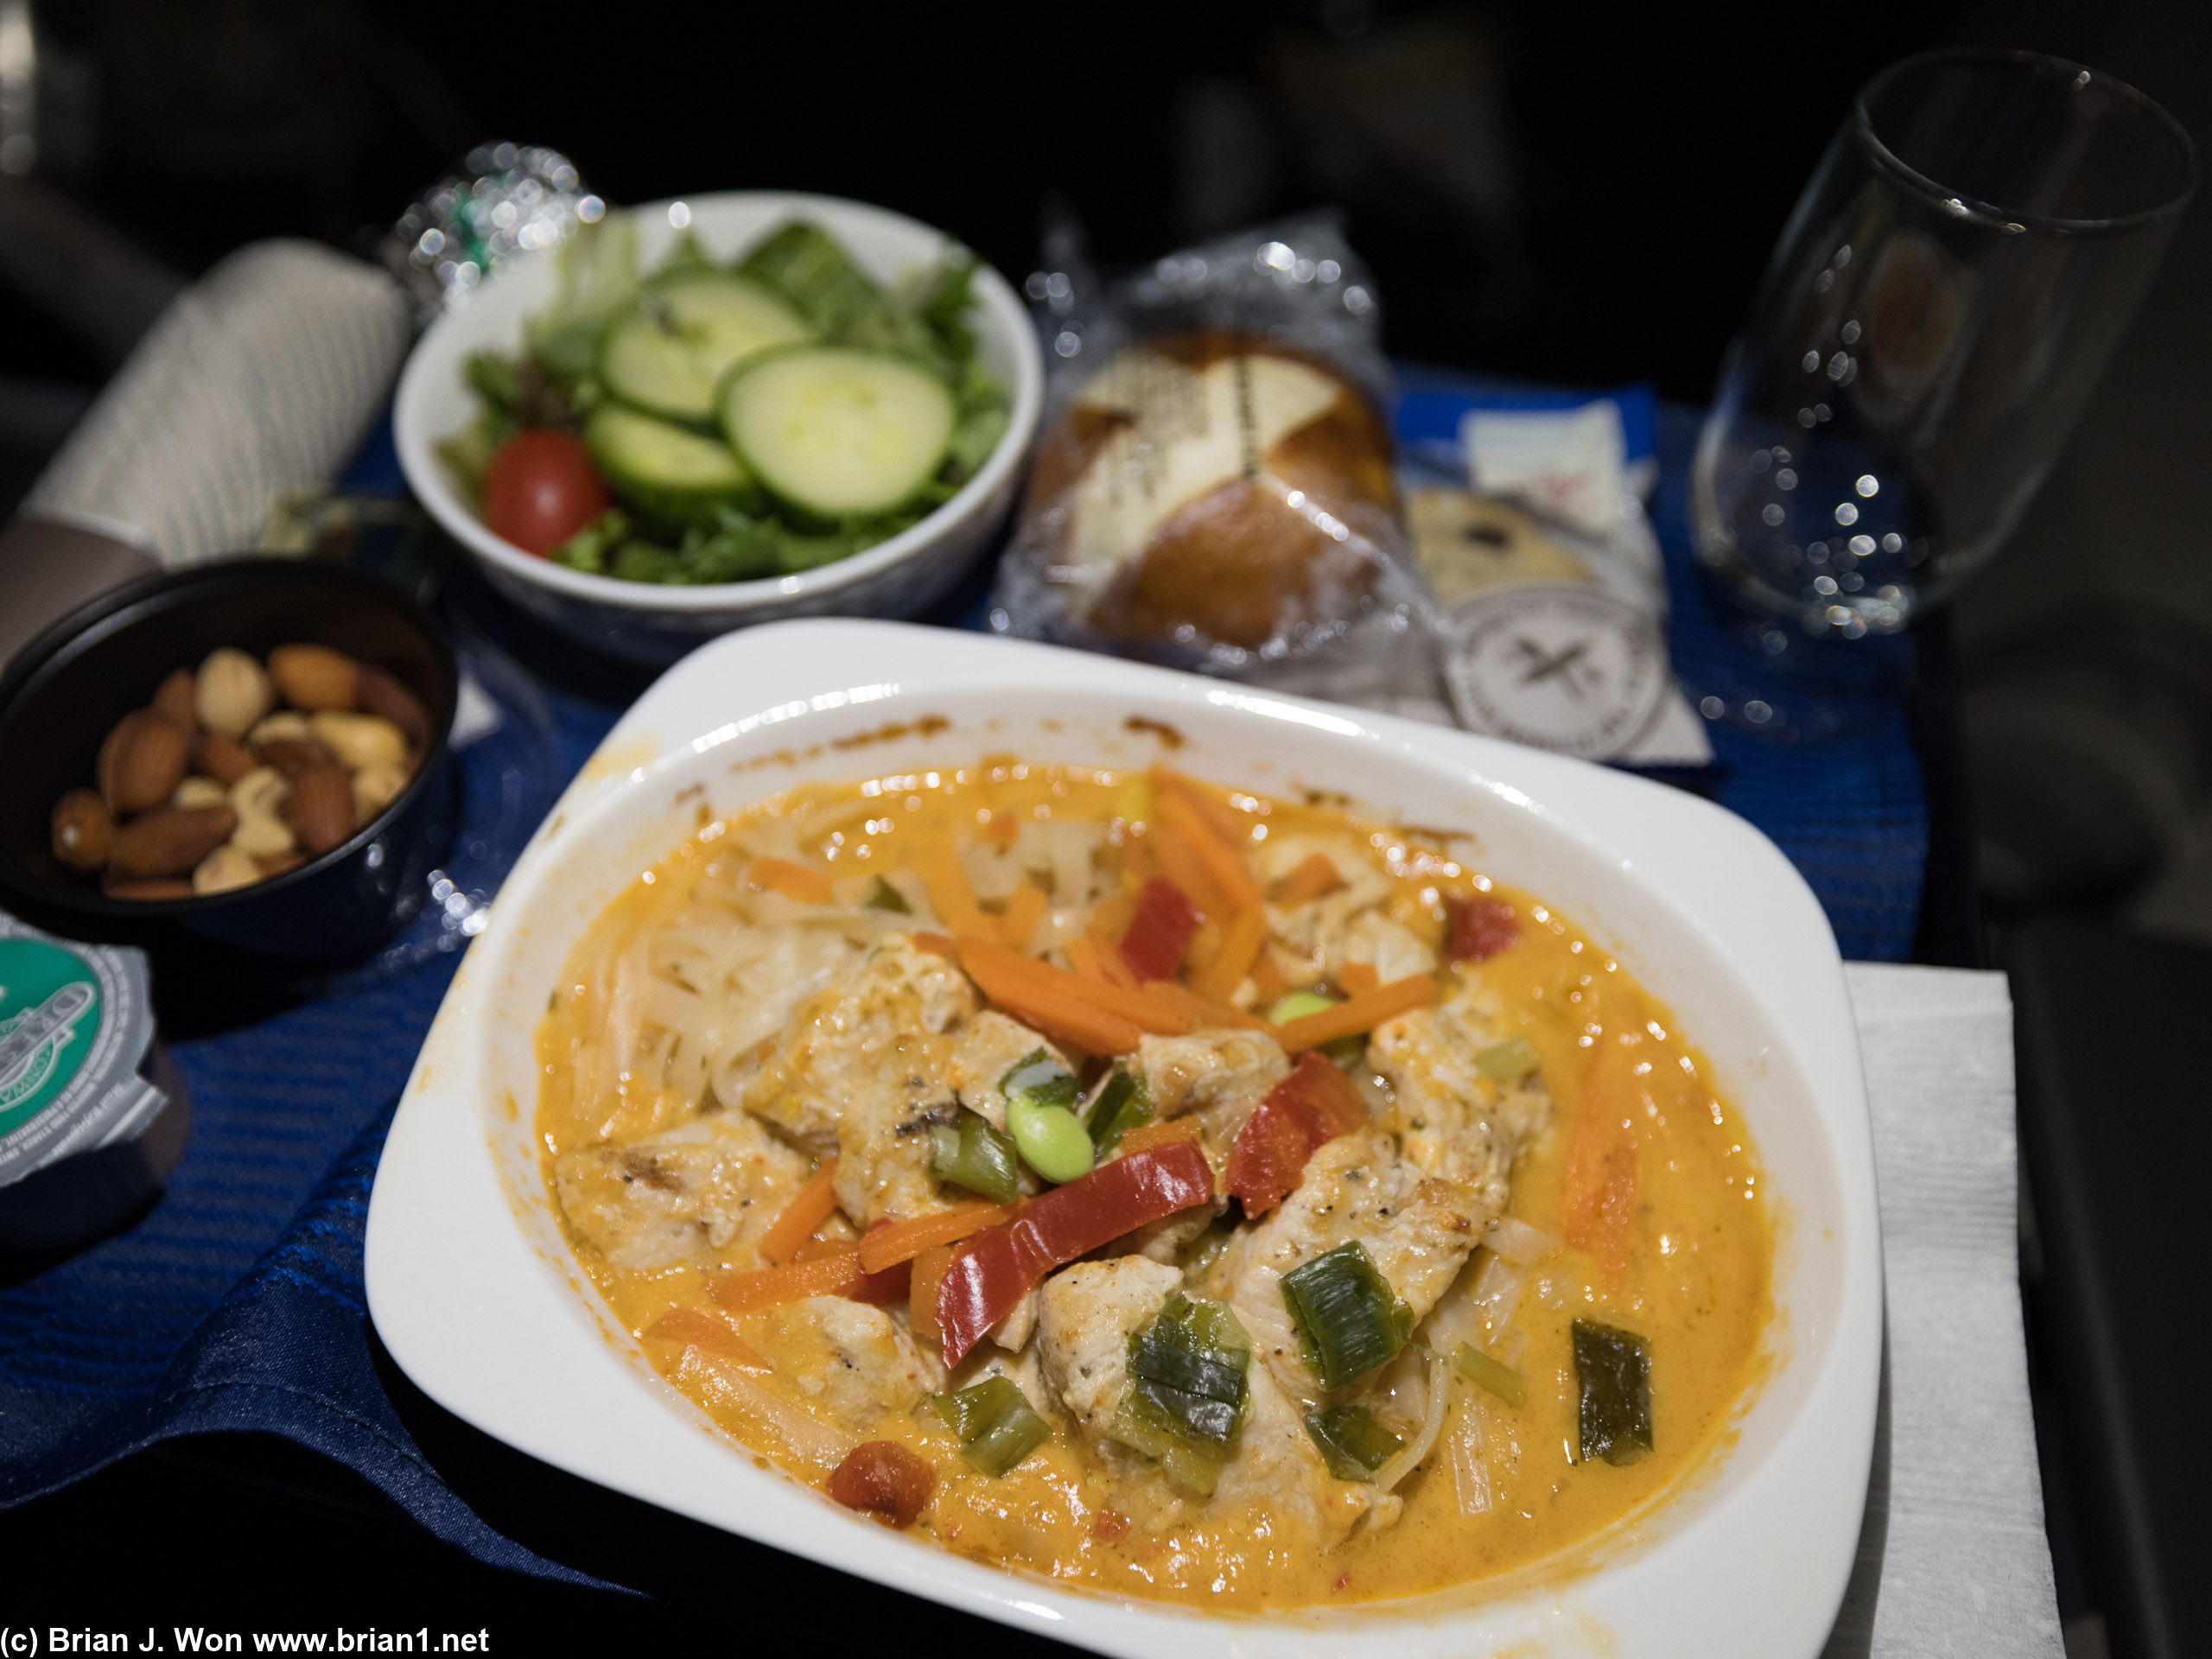 PremiumPlus (premium economy) dinner on EWR-LAX. It's more edible than it looks, which is good, because it looks disgusting.